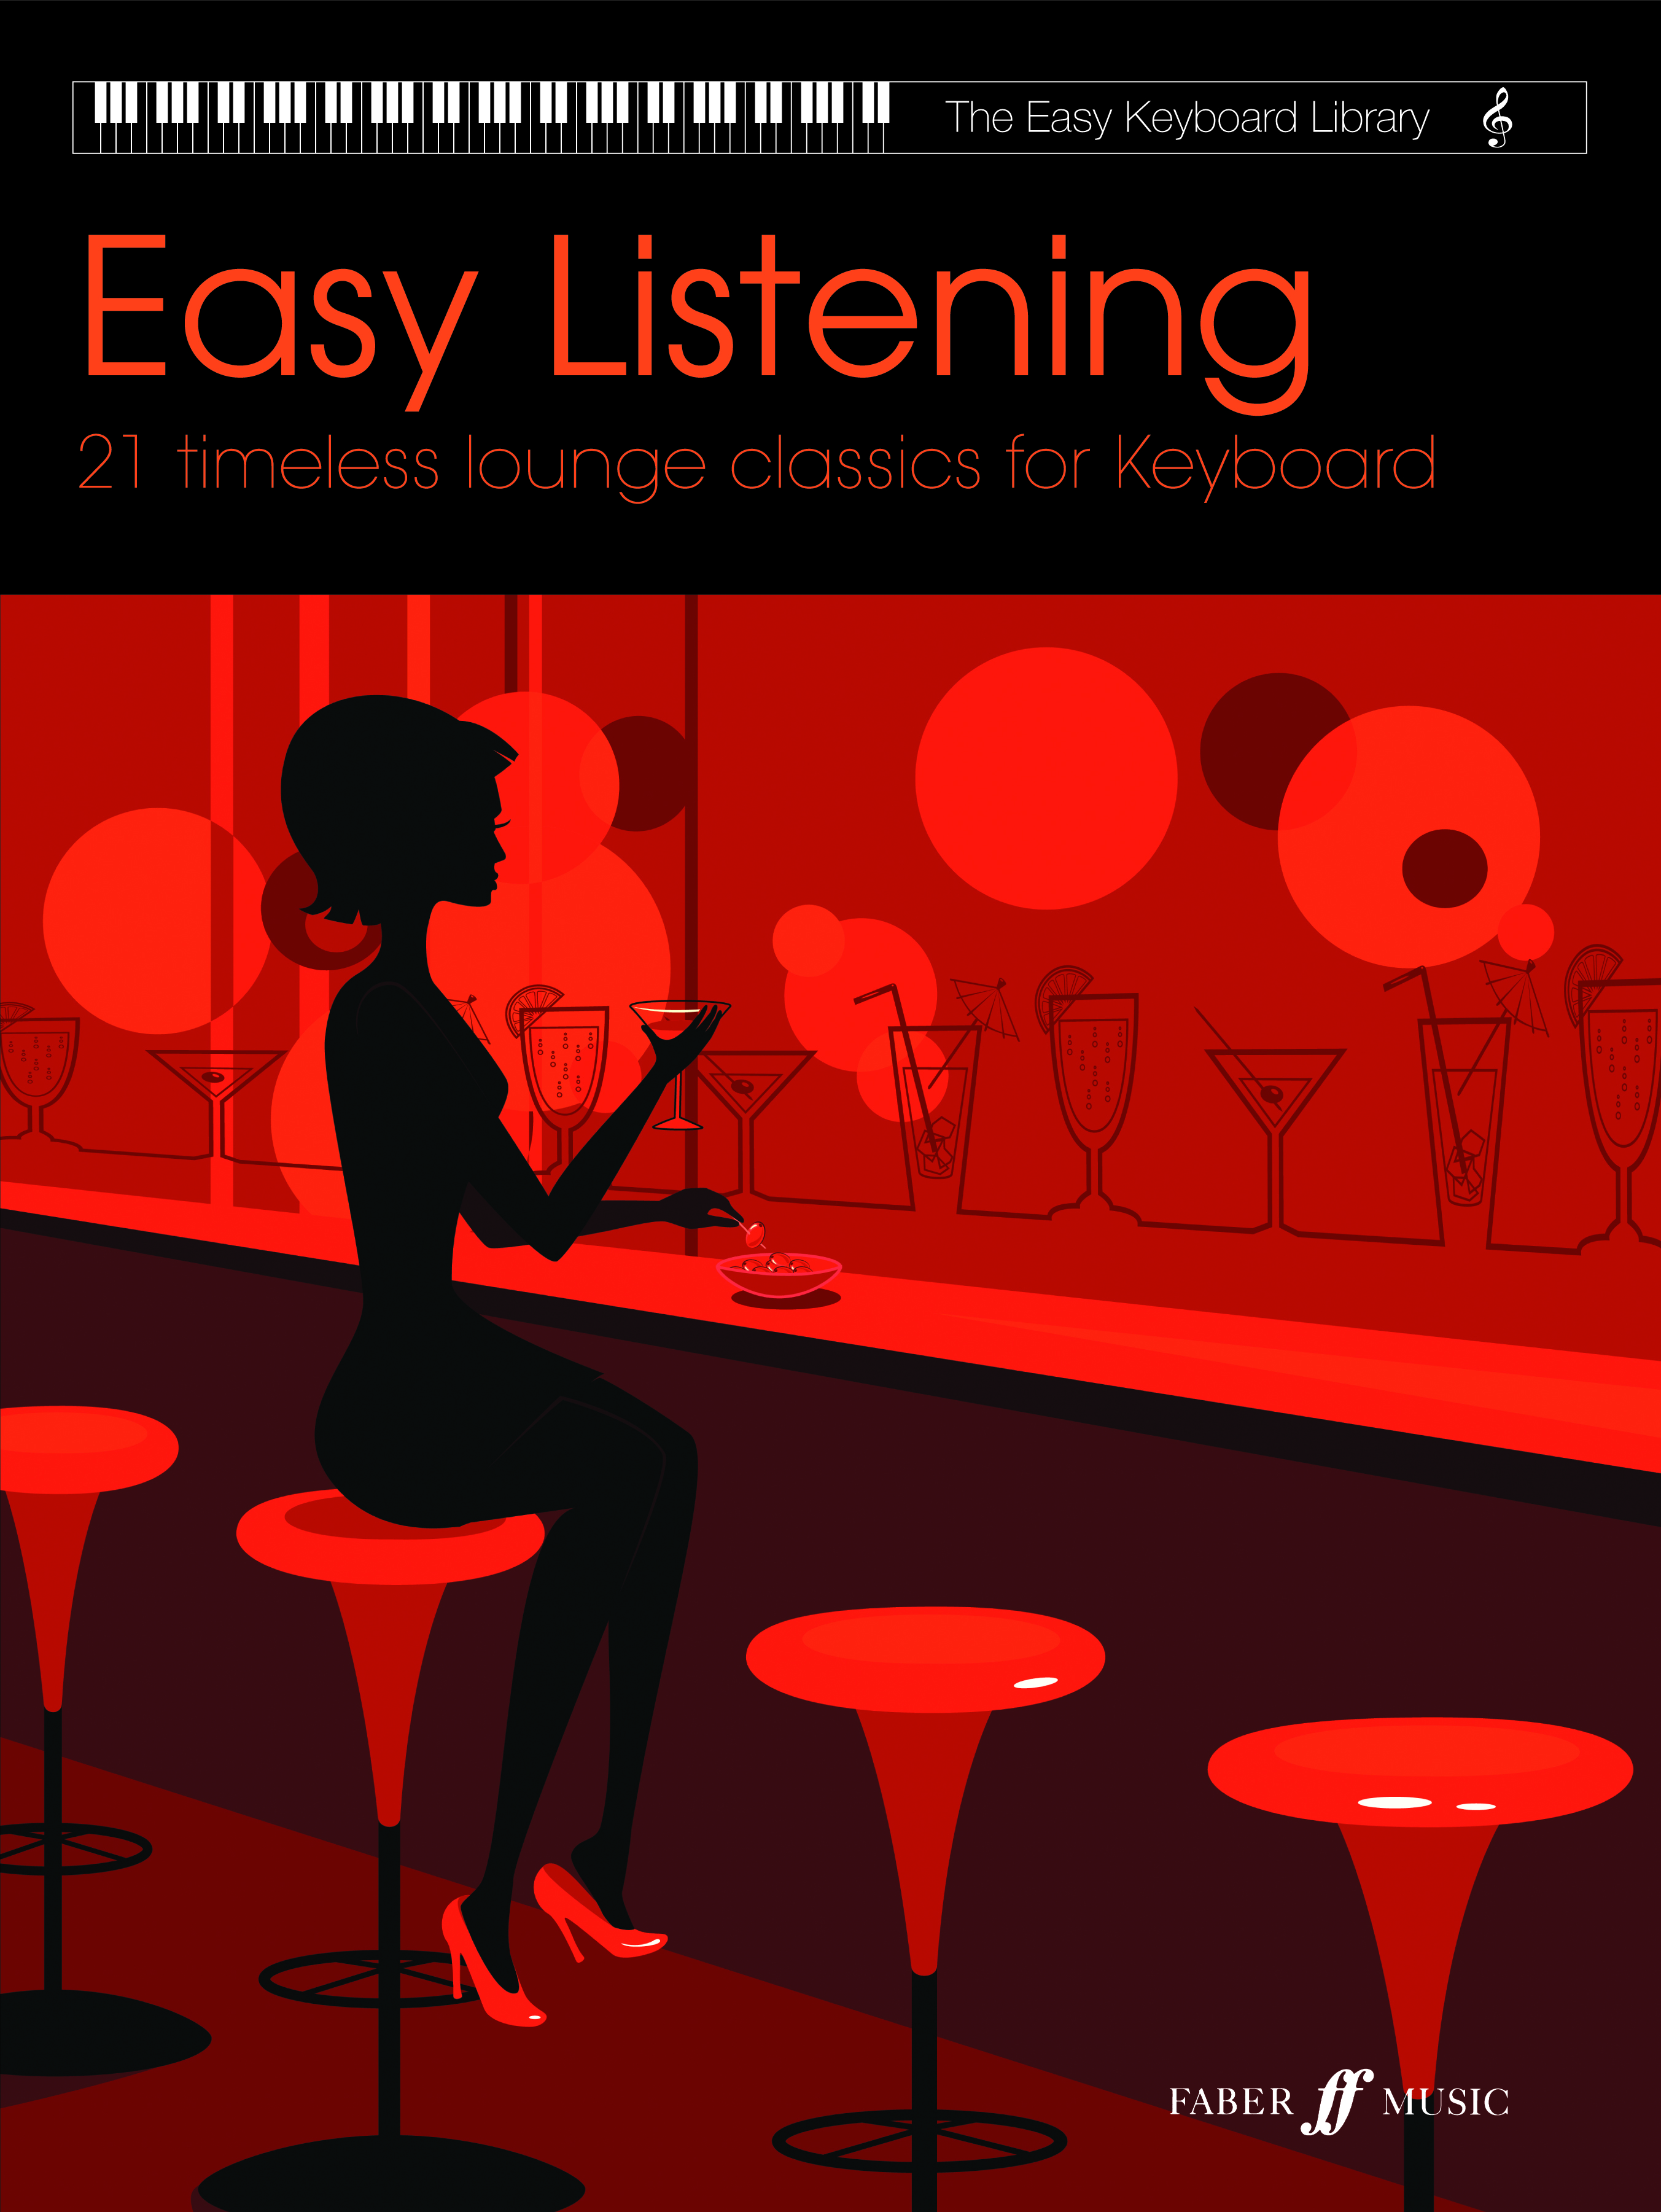 Easy Keyboard Library Easy Listening: Electric Keyboard: Mixed Songbook